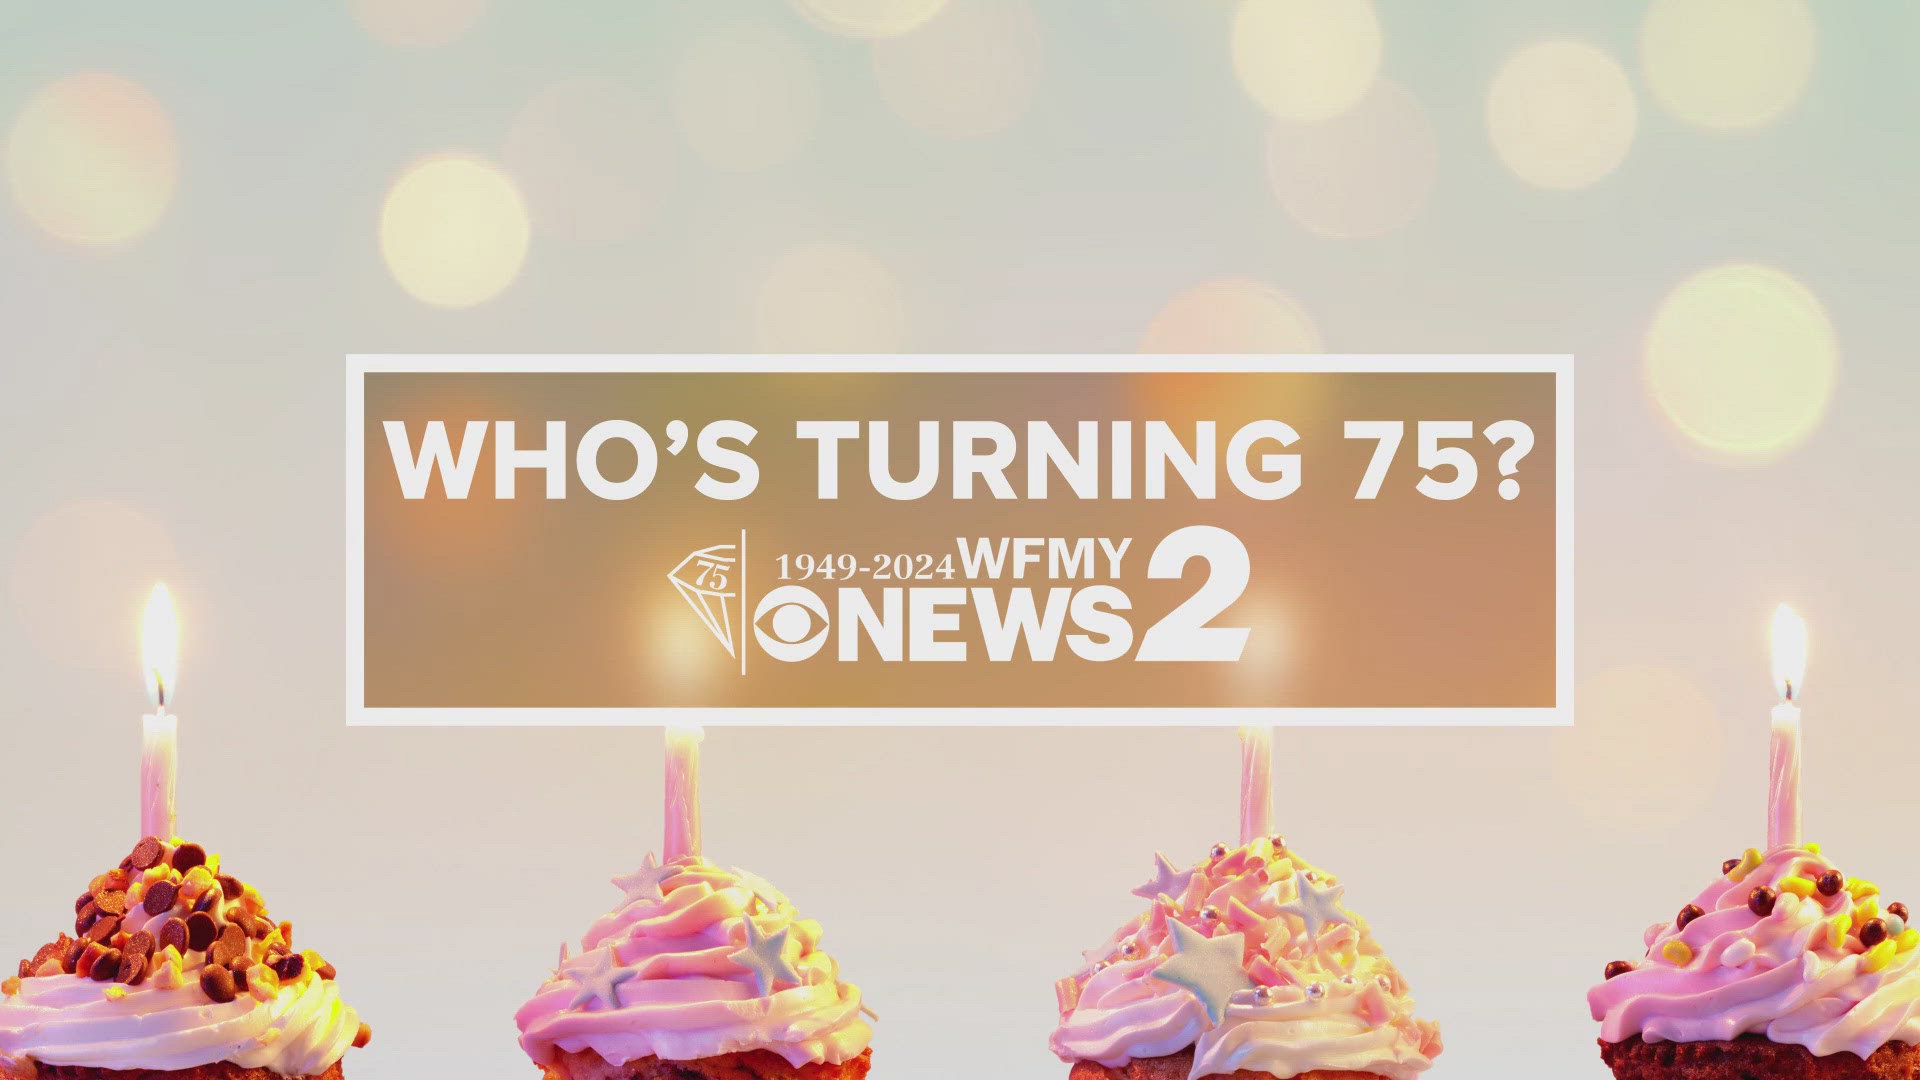 WFMY is turning 75, and we want to wish viewers turning 75 a Happy Birthday too!